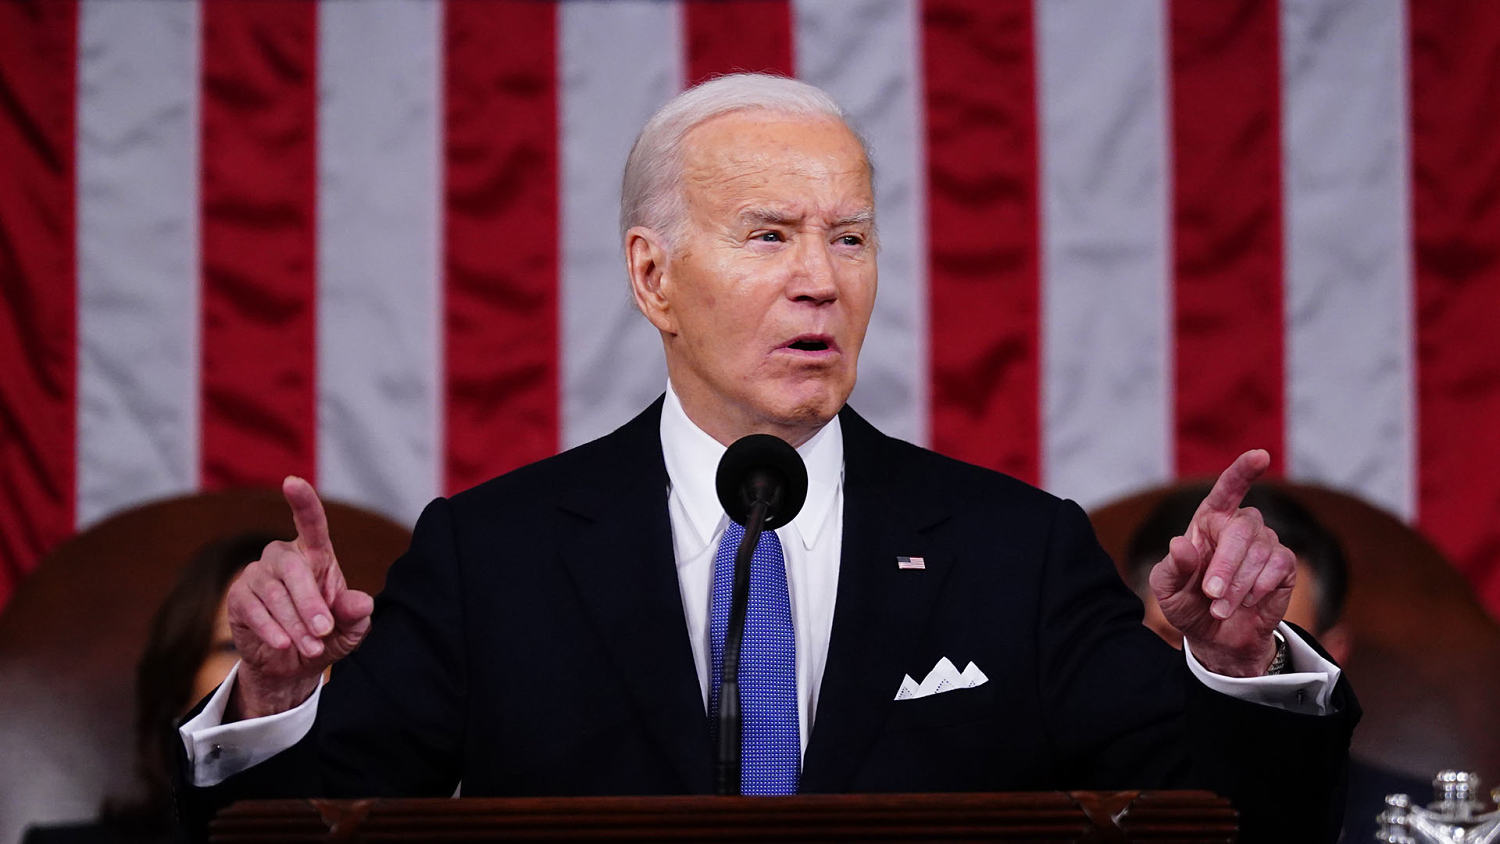 Biden vouches for immigration package, rejects Trump rhetoric